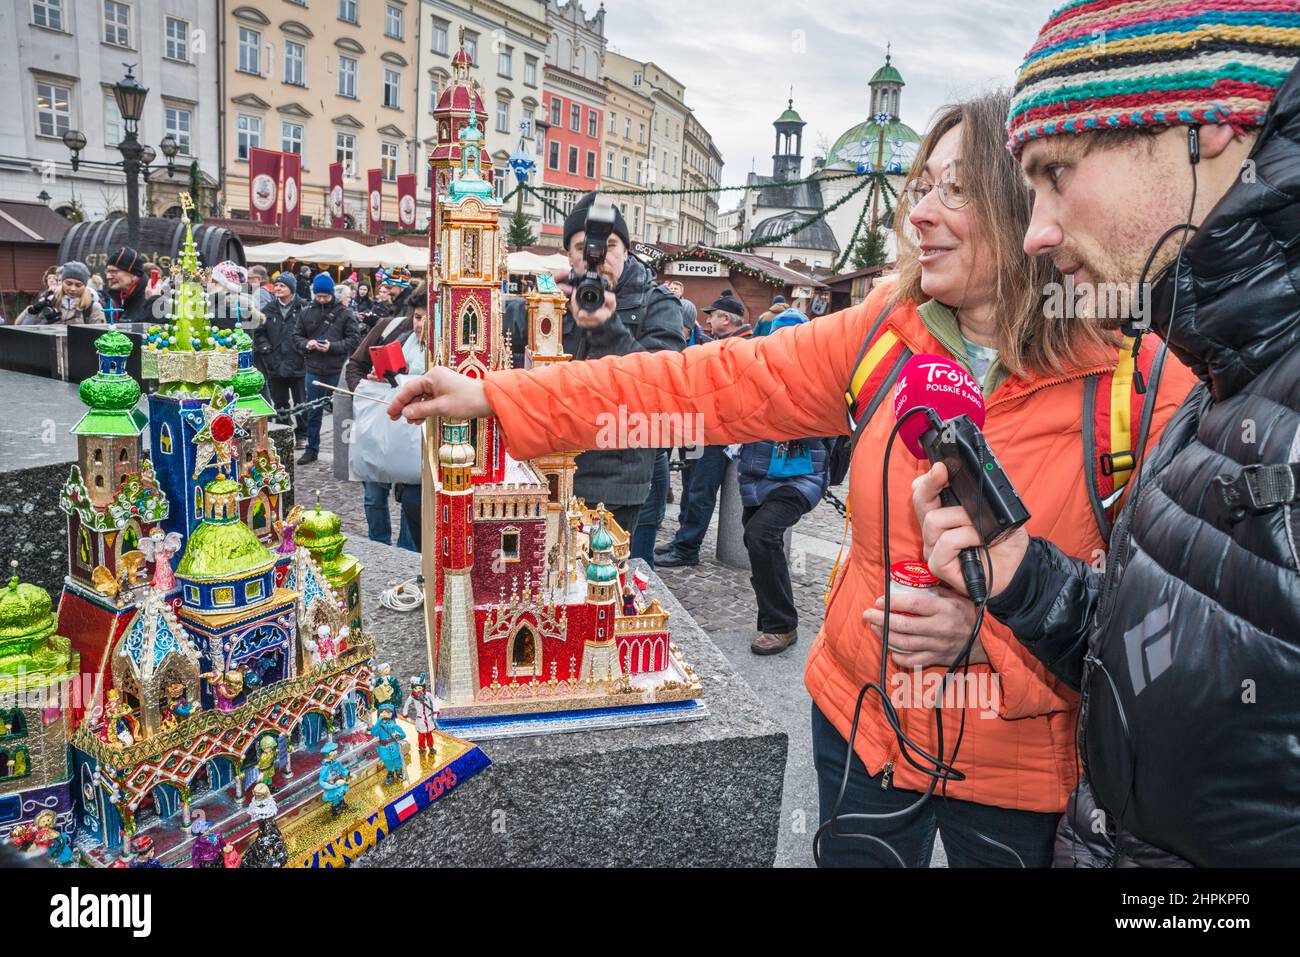 Radio reporter interviewing, Kraków Szopka nativity scenes displayed during annual contest in December, event included in UNESCO Cultural Heritage list, at Adam Mickiewicz monument, Main Market Square, Kraków, Poland Stock Photo